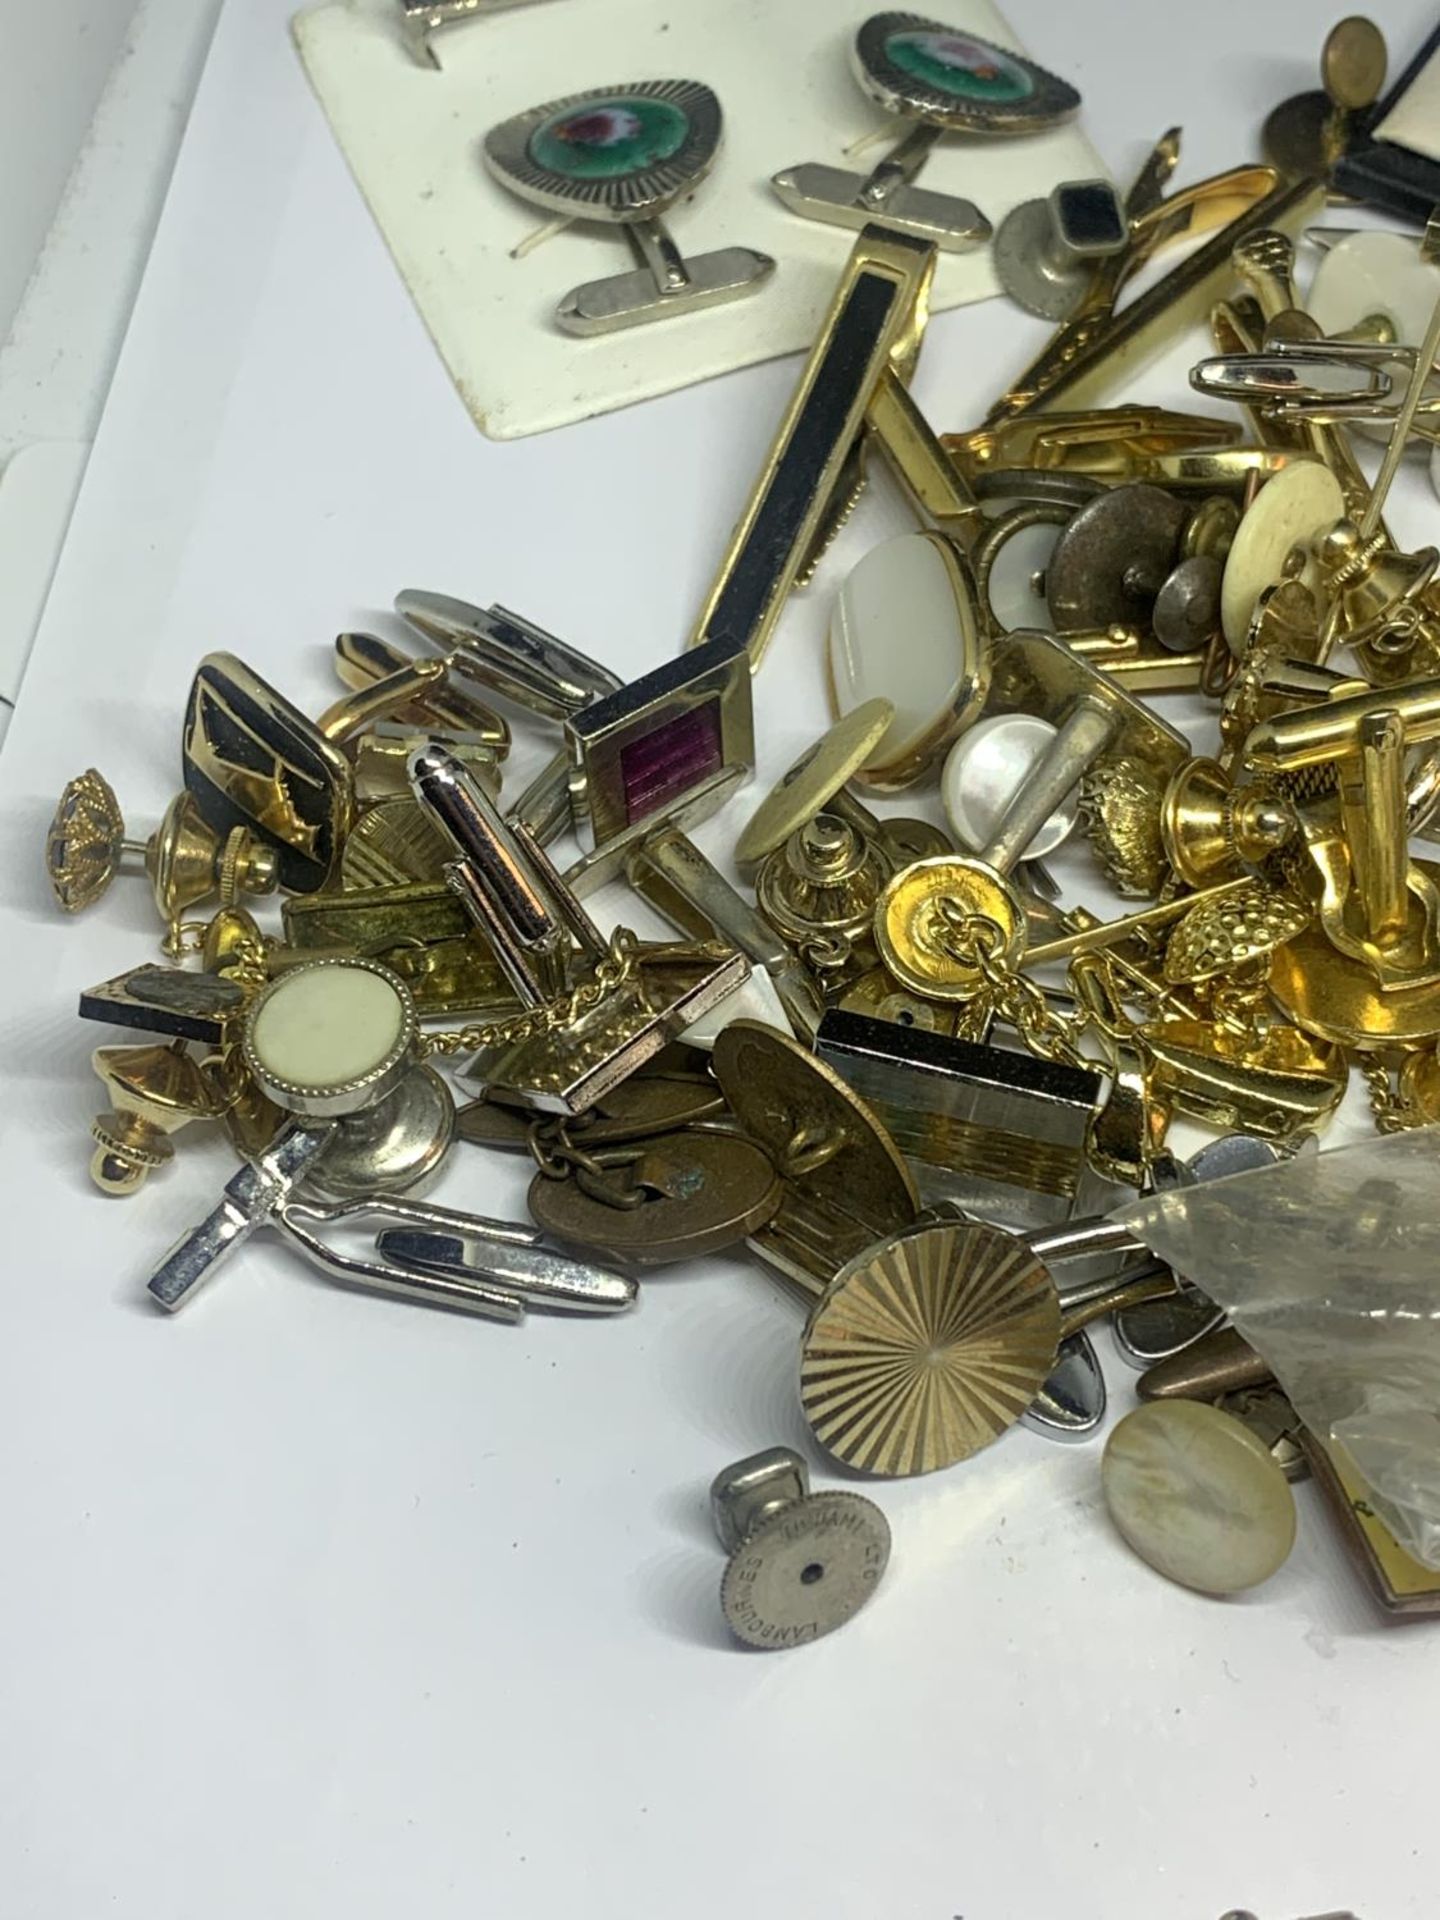 A LARGE QUANTIY OF CUFFLINKS AND TIE PINS - Image 7 of 7